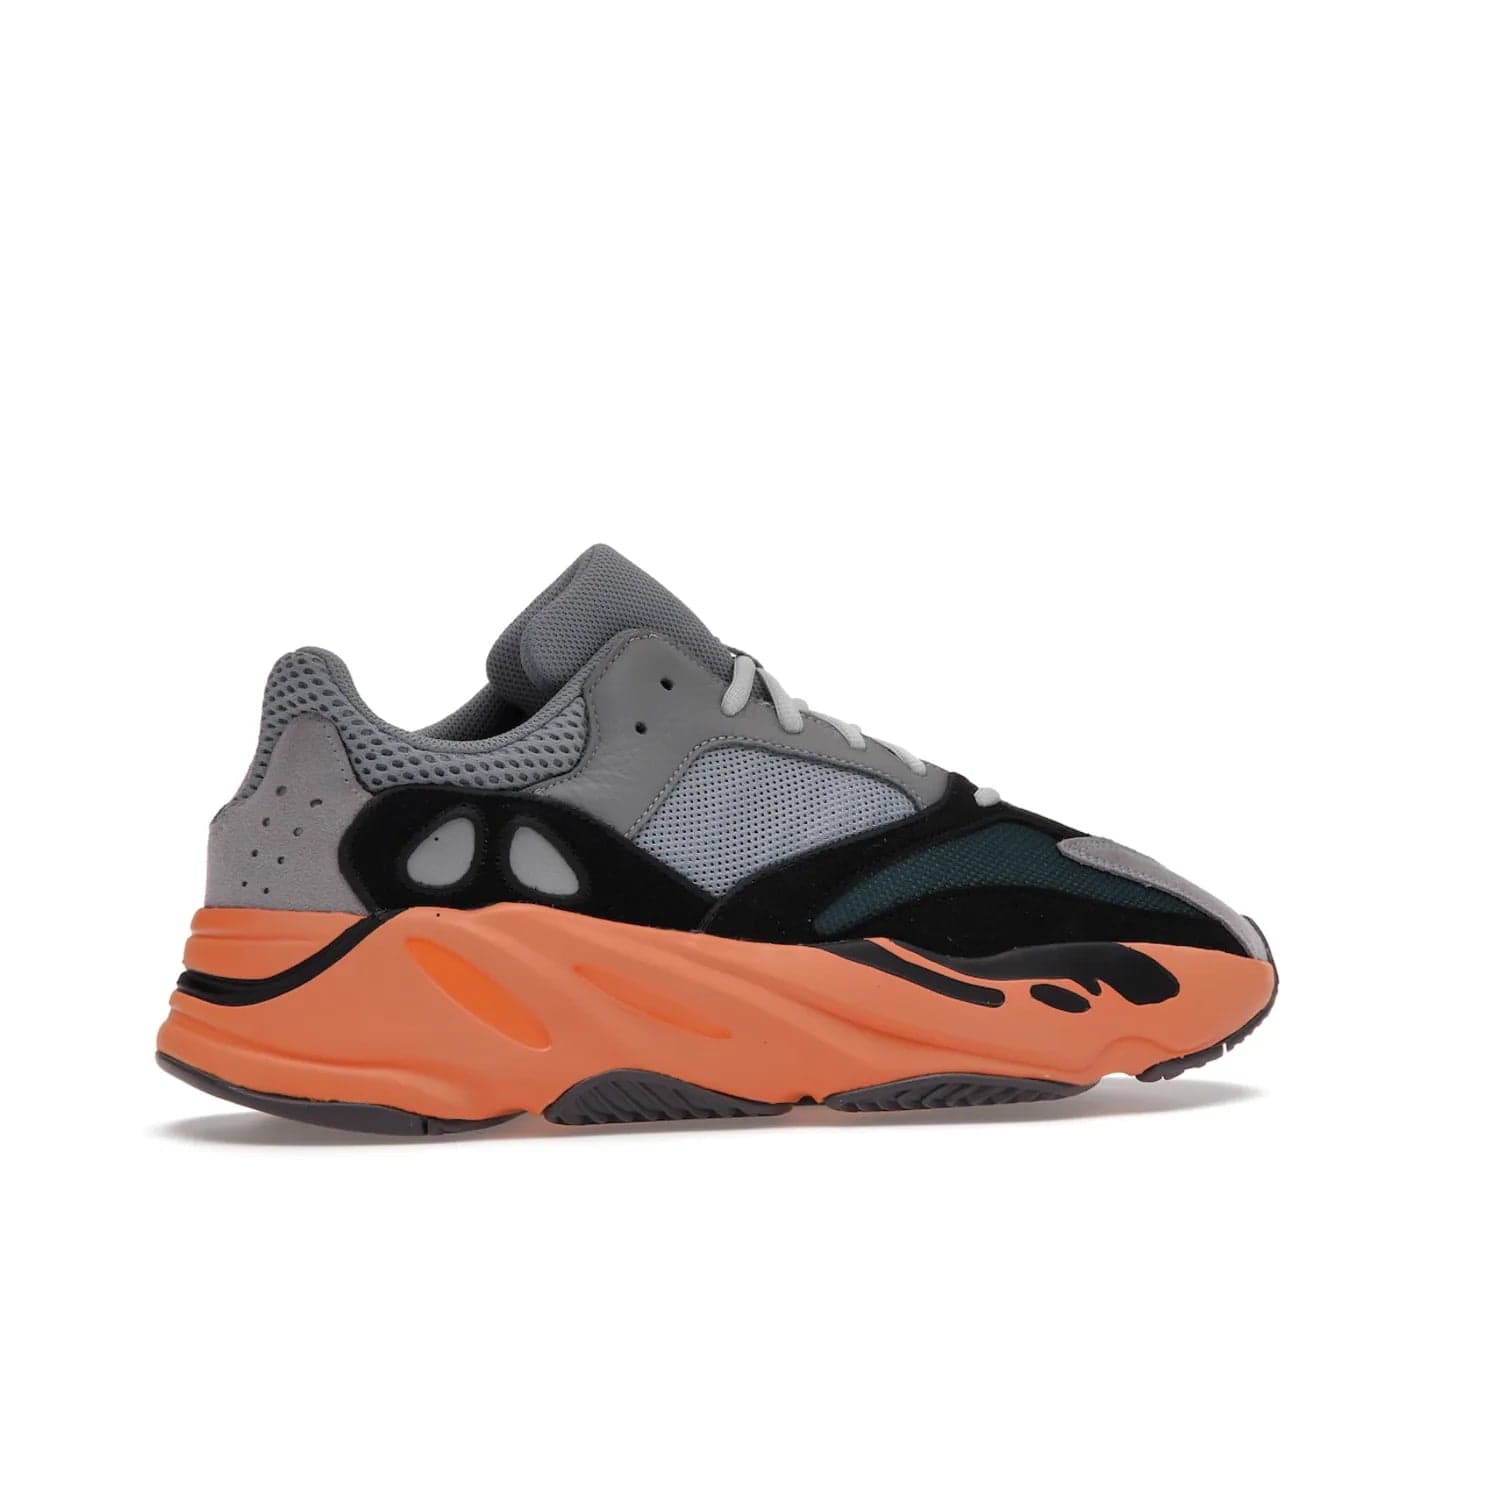 adidas Yeezy Boost 700 Wash Orange - Image 35 - Only at www.BallersClubKickz.com - Introducing the adidas Yeezy Boost 700 Wash Orange. Unique grey leather, suede, mesh upper and teal panels with a chunky Wash Orange Boost midsole. Release October 2021, make a statement today!